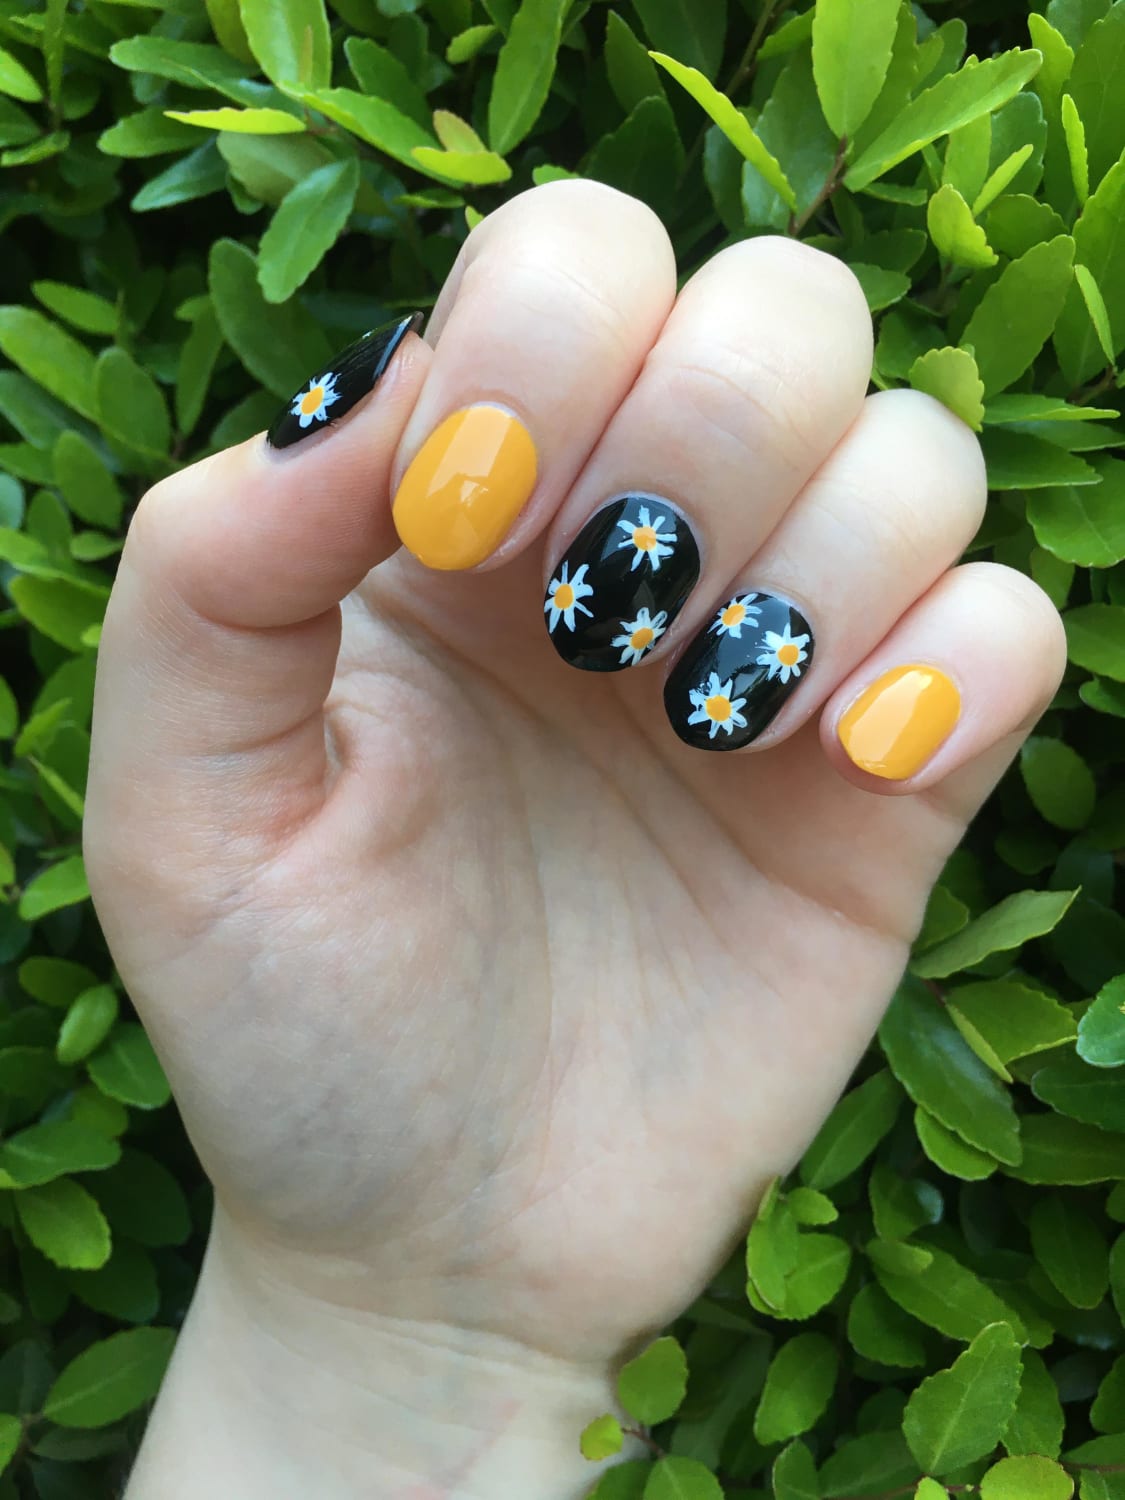 Sunshine, daisies, butter mellow, turn these damaged, cracked nails yellow!